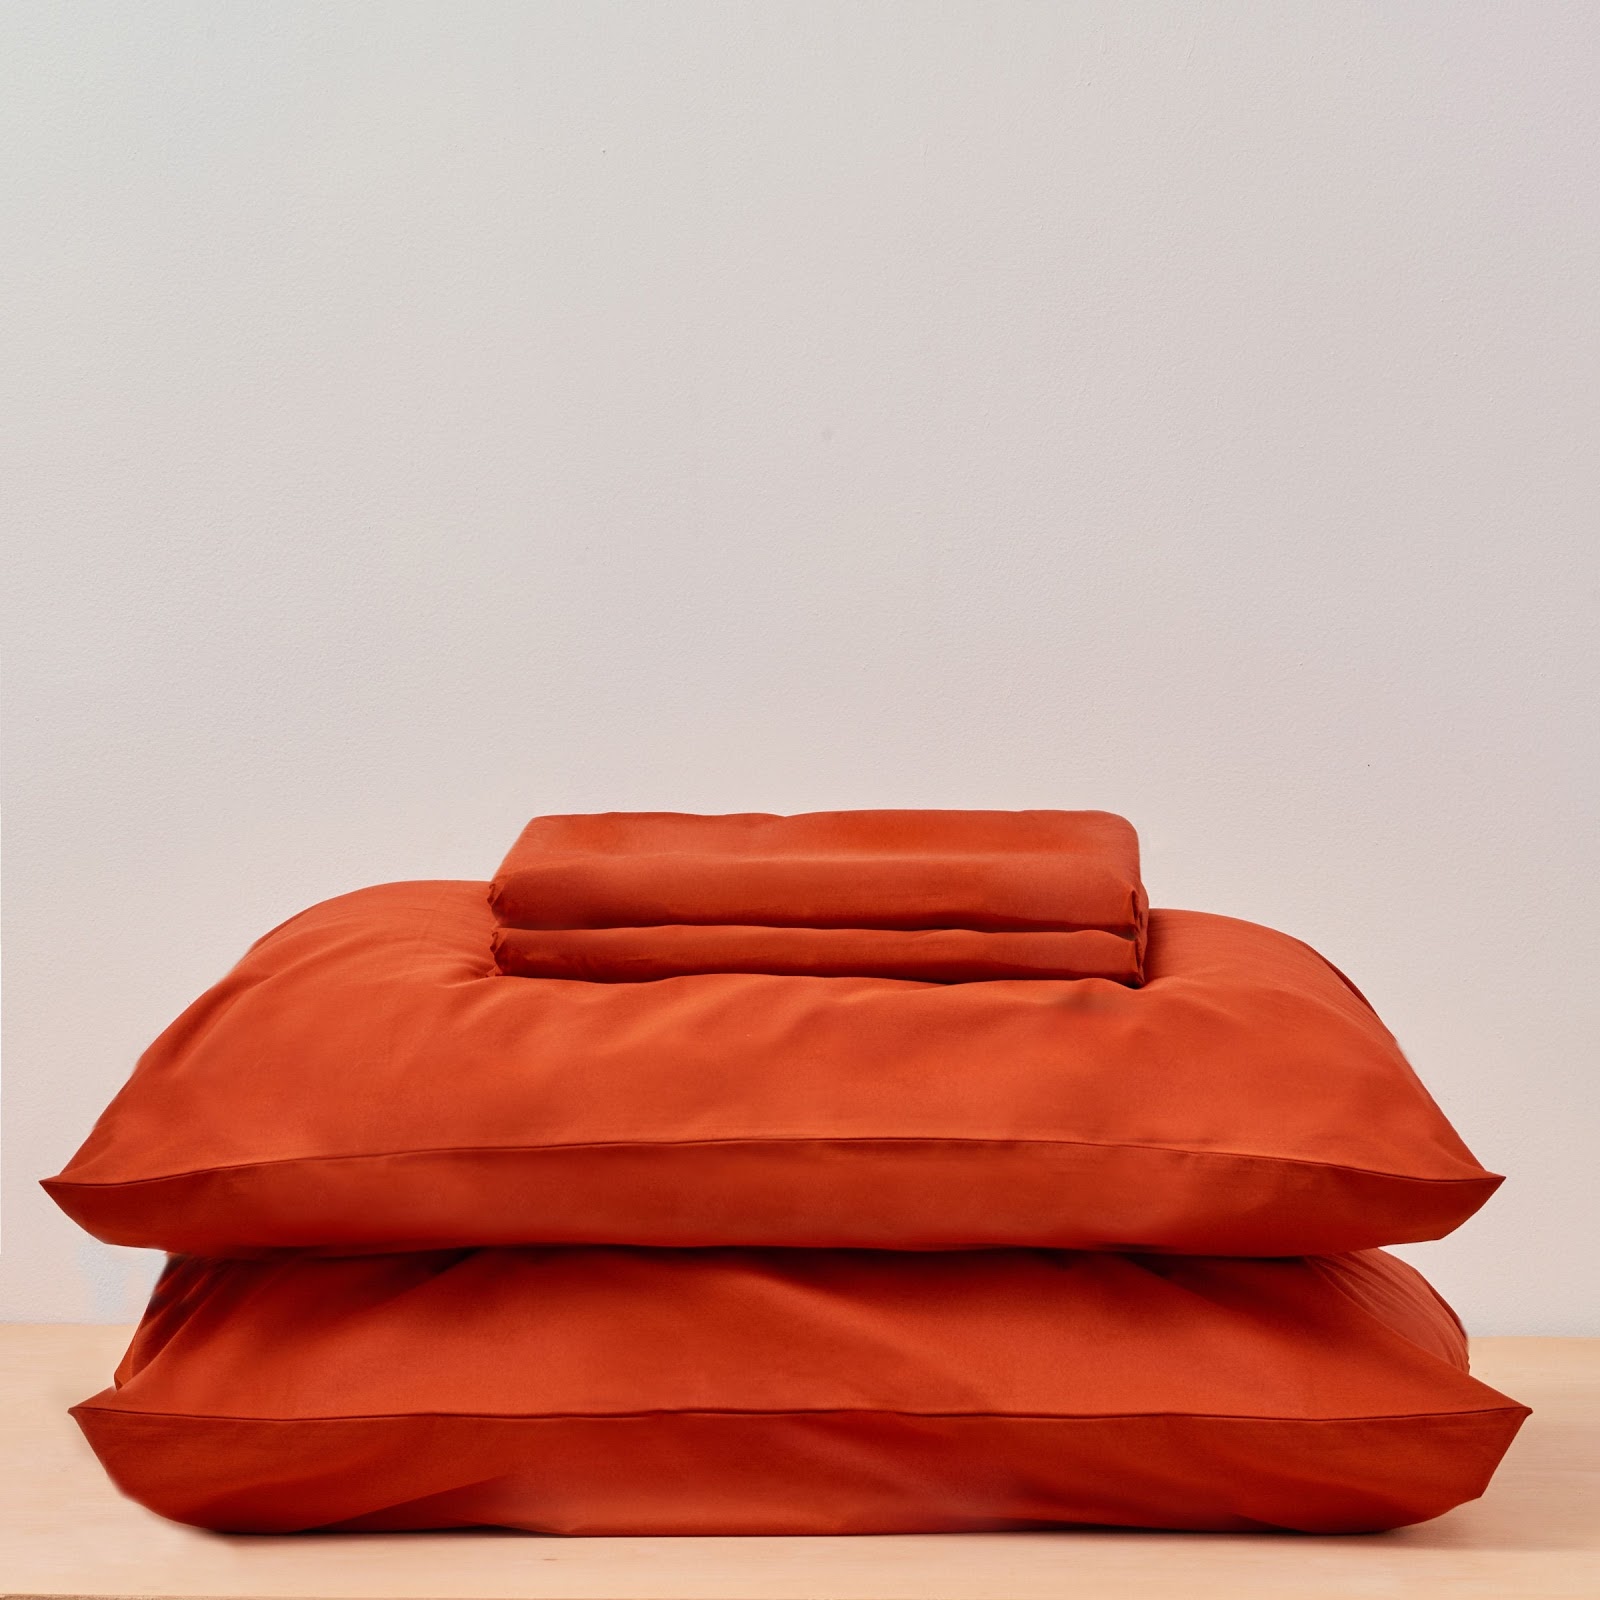 Set of red sheets and pillows